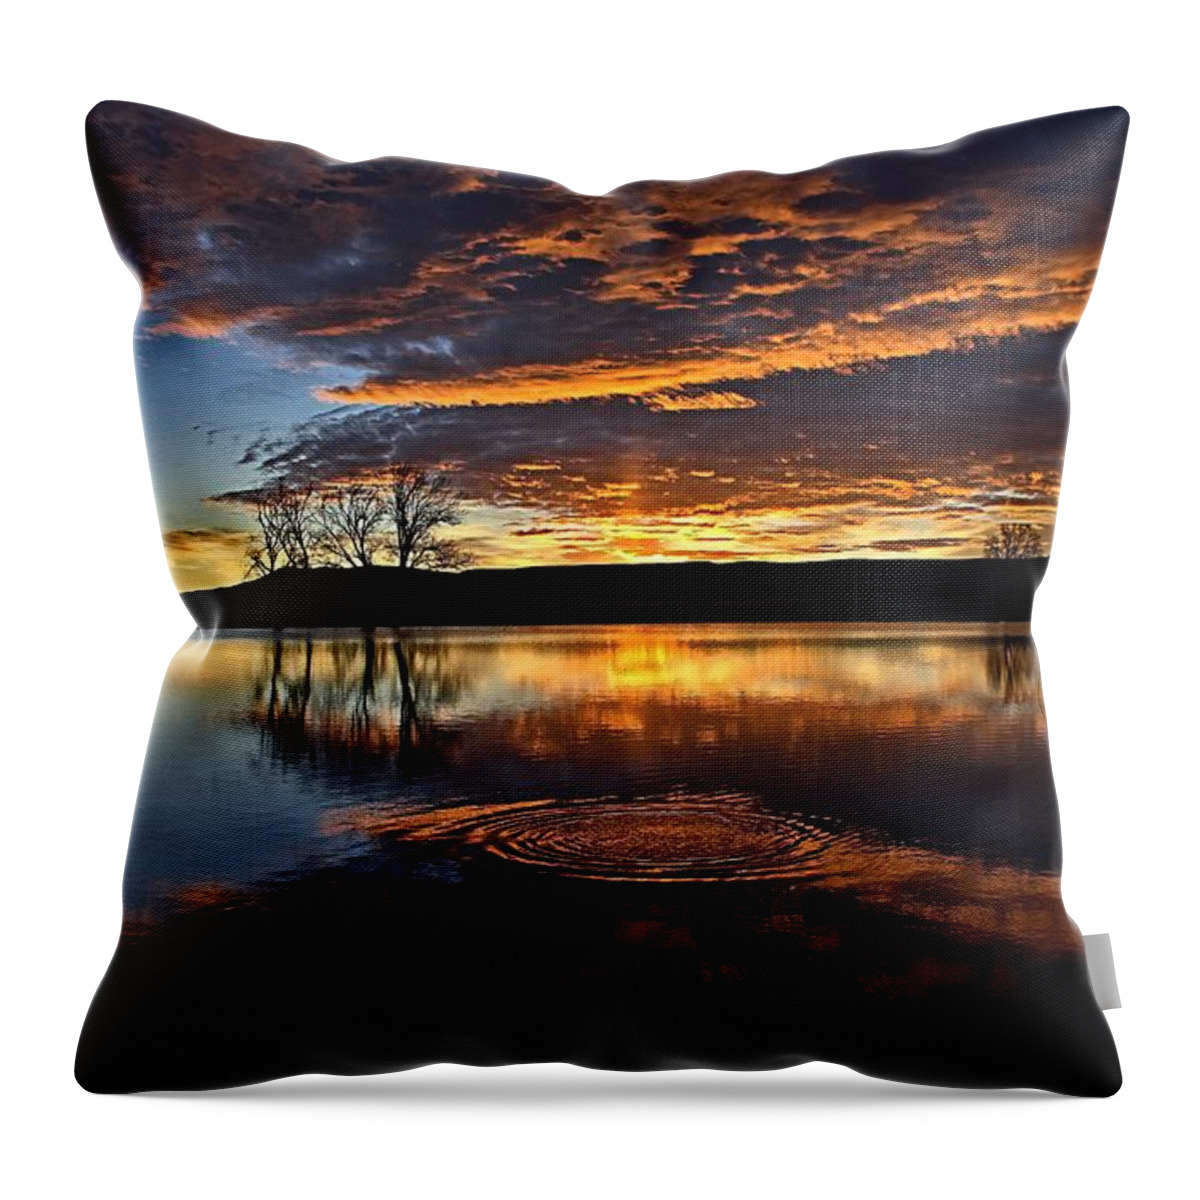 Sunrise Throw Pillow featuring the photograph One Fish Jumps by Fiskr Larsen